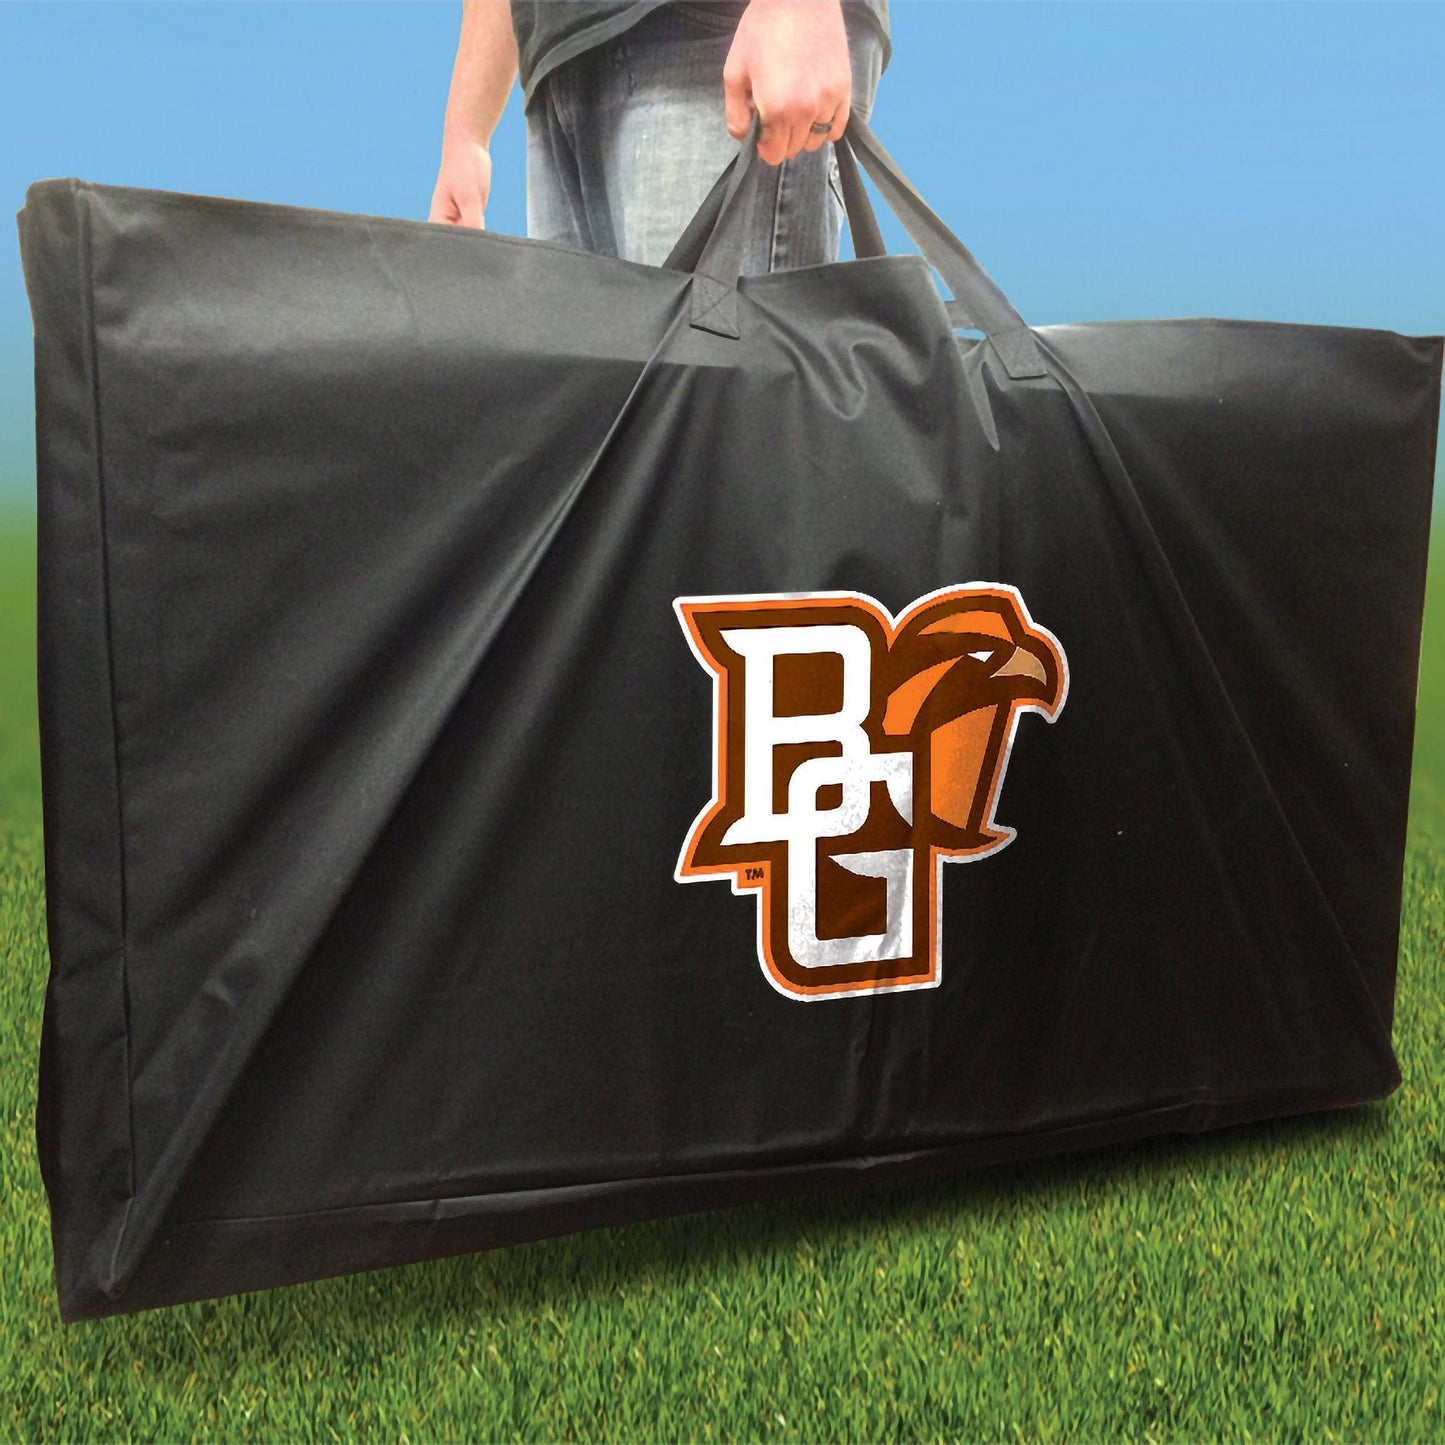 Bowling Green Falcons Stained Pyramid team logo carry case